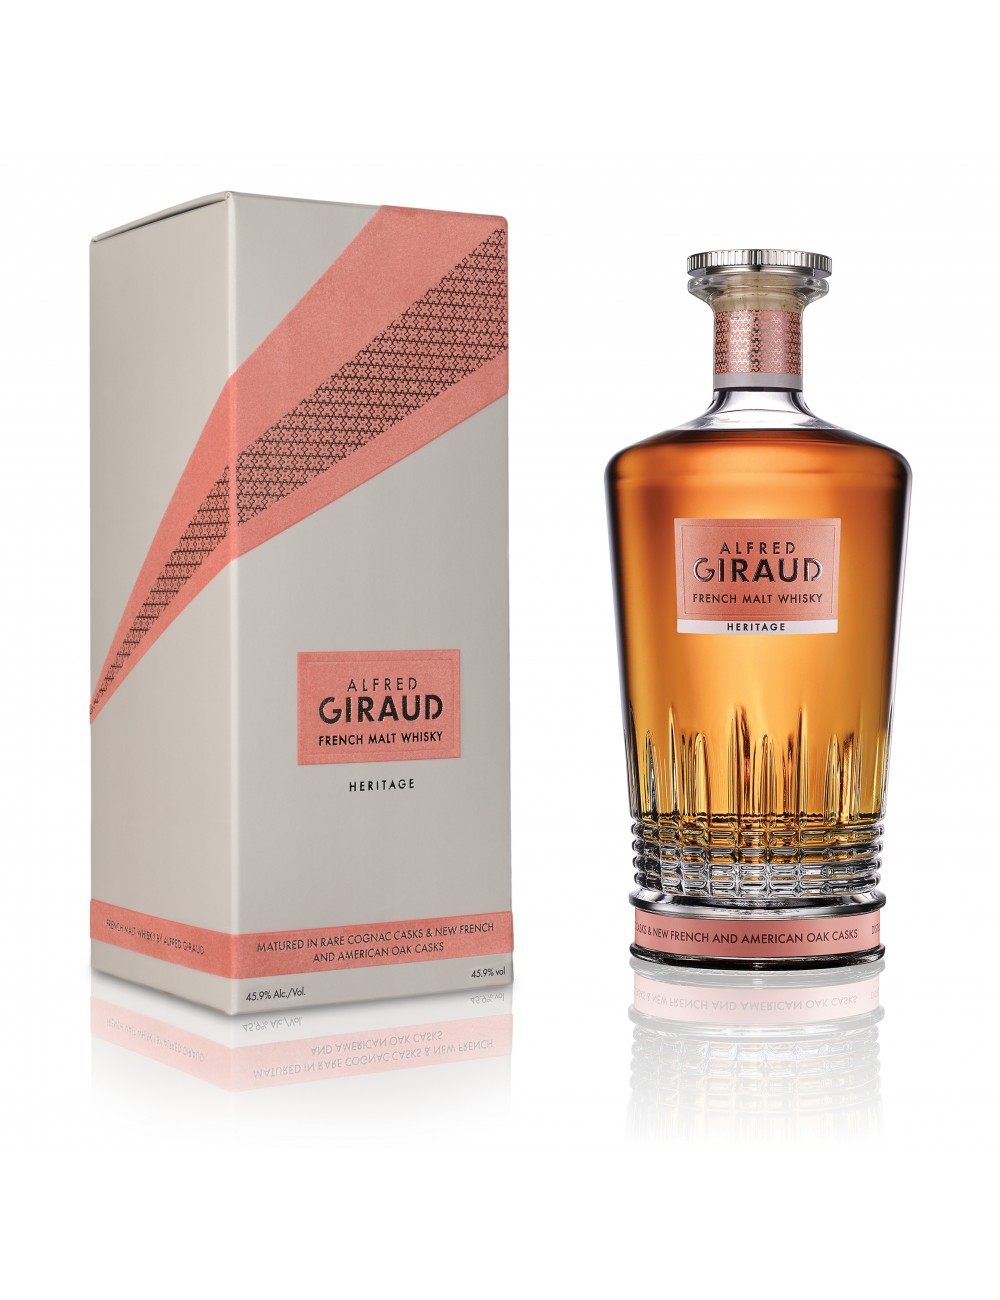 whisky-alfred-giraud-heritage-70-cl